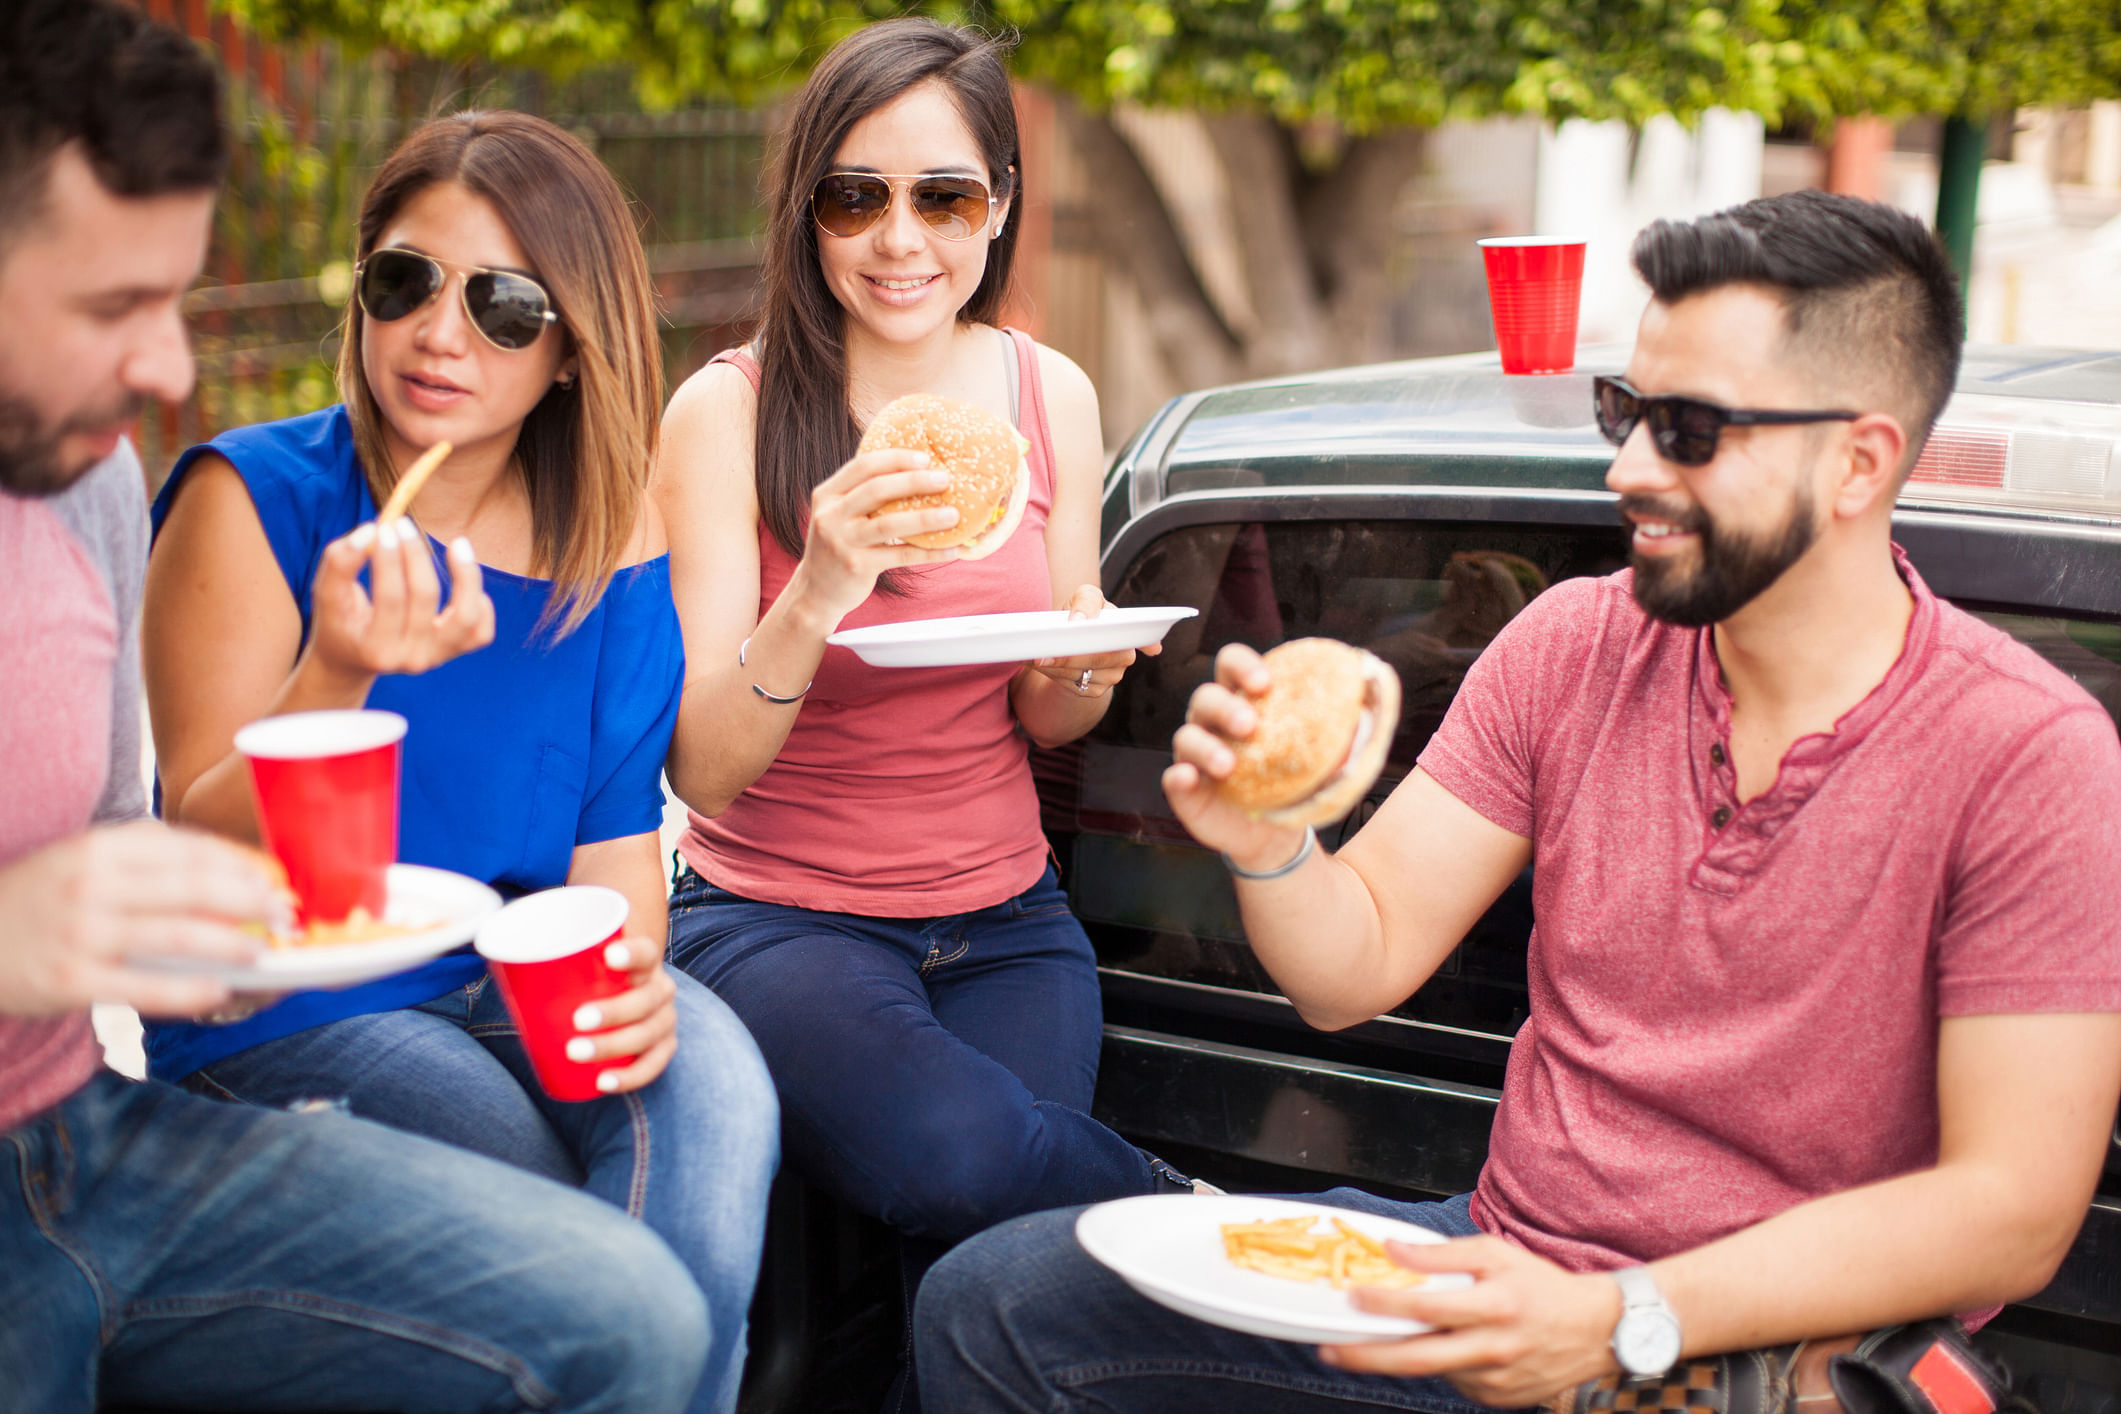 French fries, cold drinks and chaat cannot substitute a balanced meal, say nutritionists.